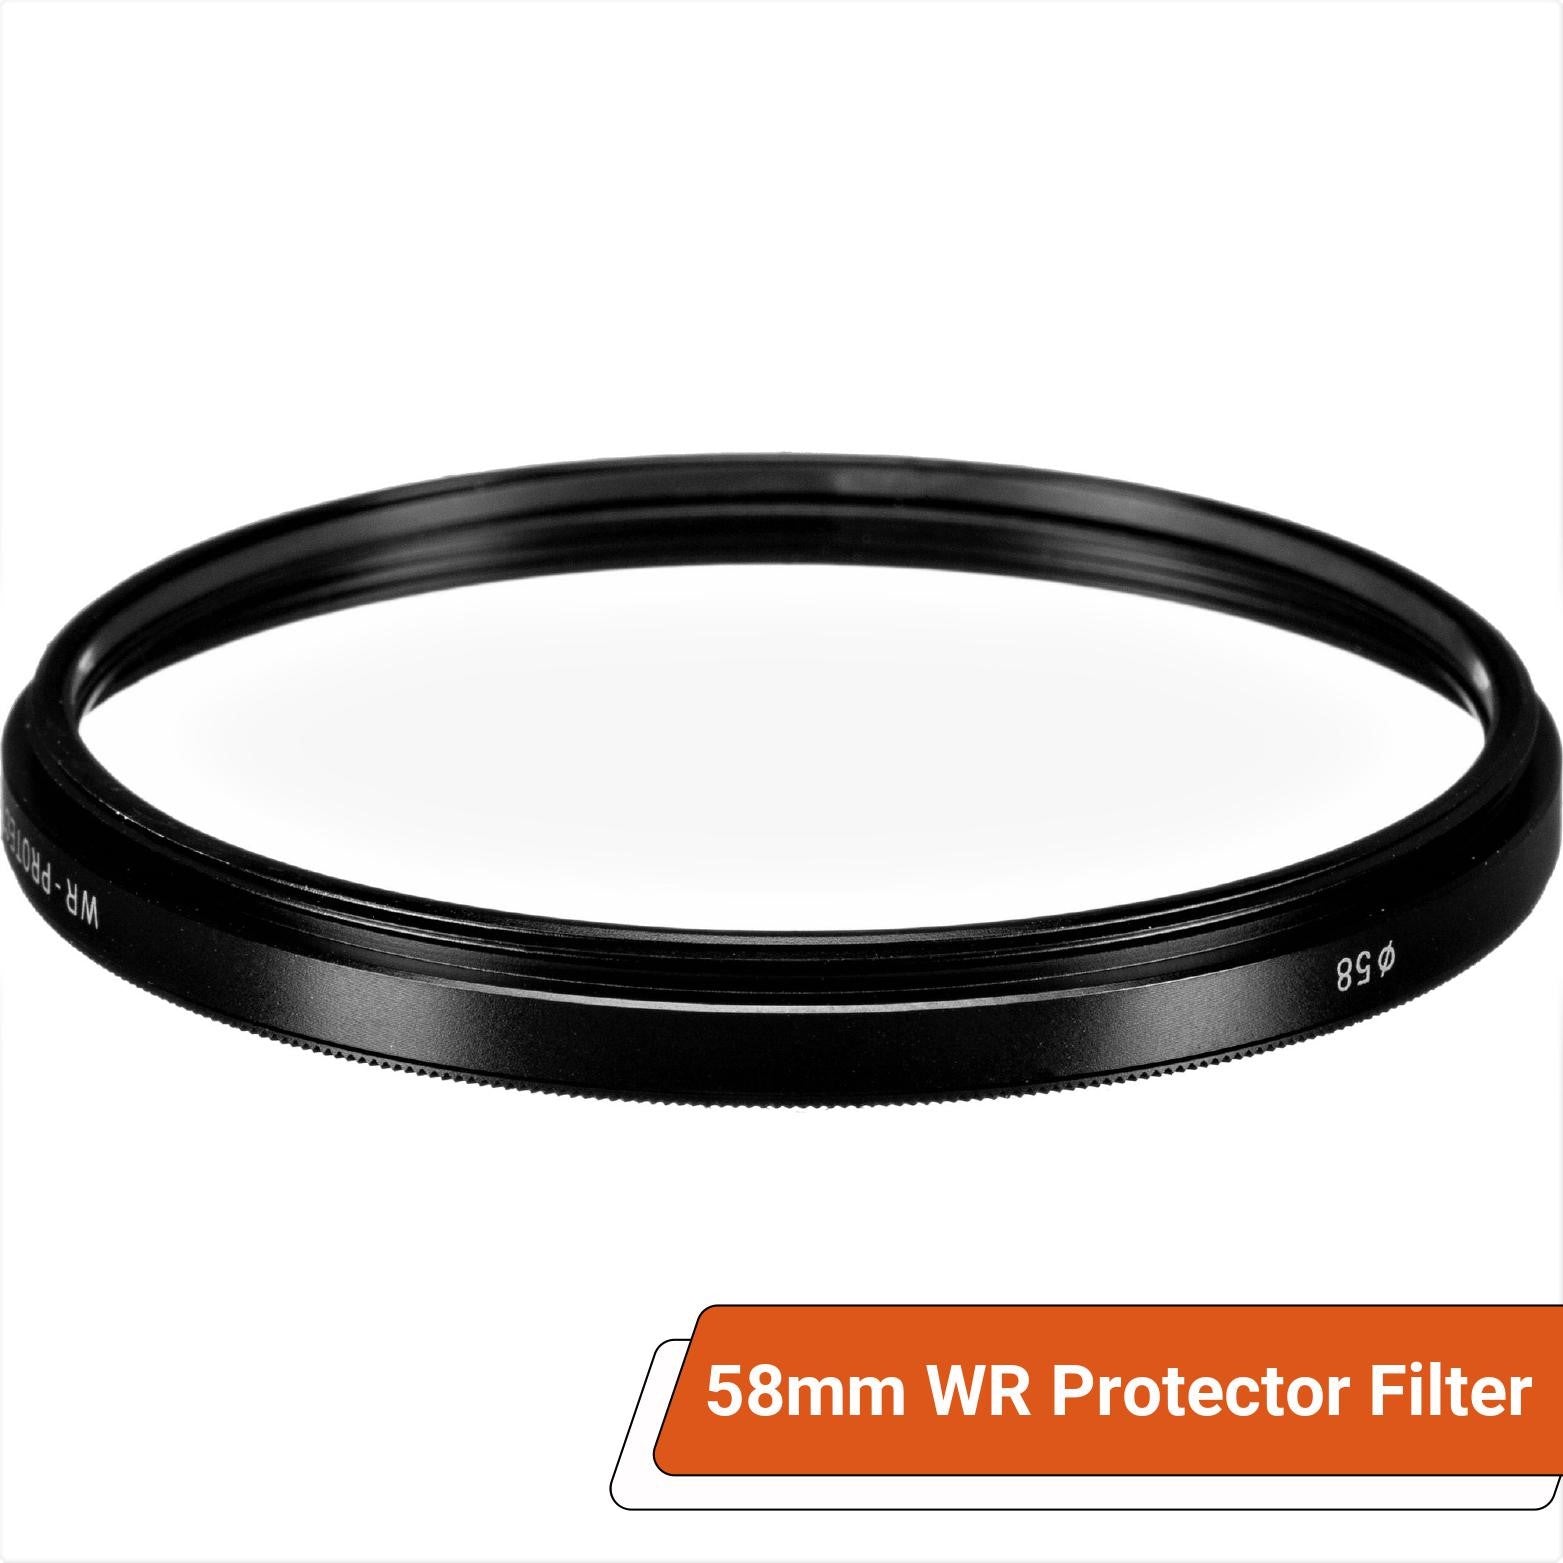 Sigma 58mm WR (Water Repellent) Protector Filter